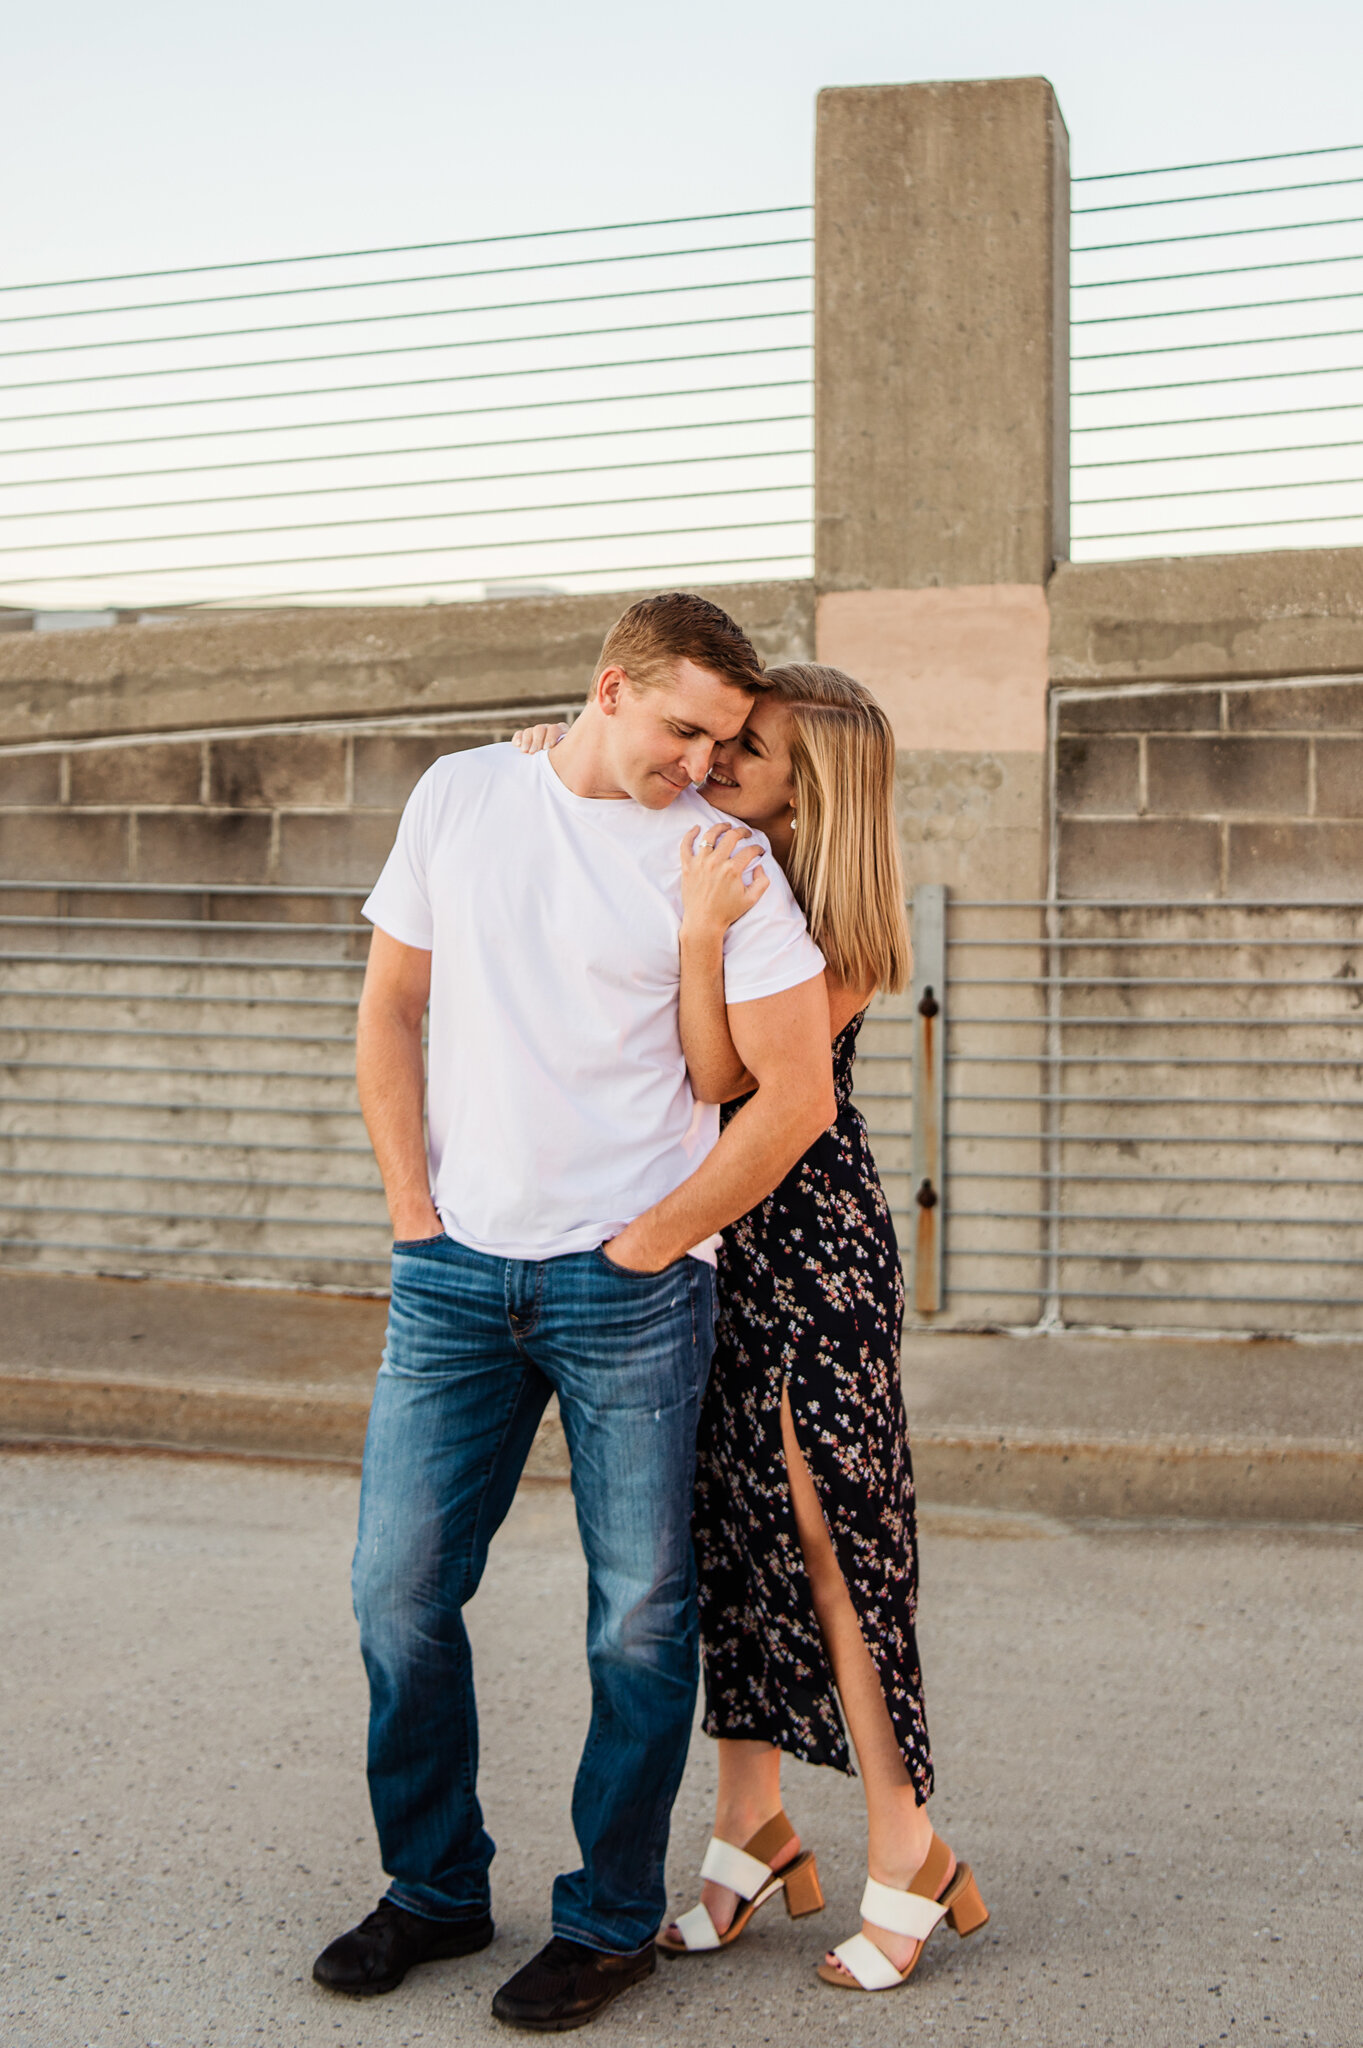 Genesee_Brew_House_High_Falls_Rochester_Engagement_Session_JILL_STUDIO_Rochester_NY_Photographer_5786.jpg